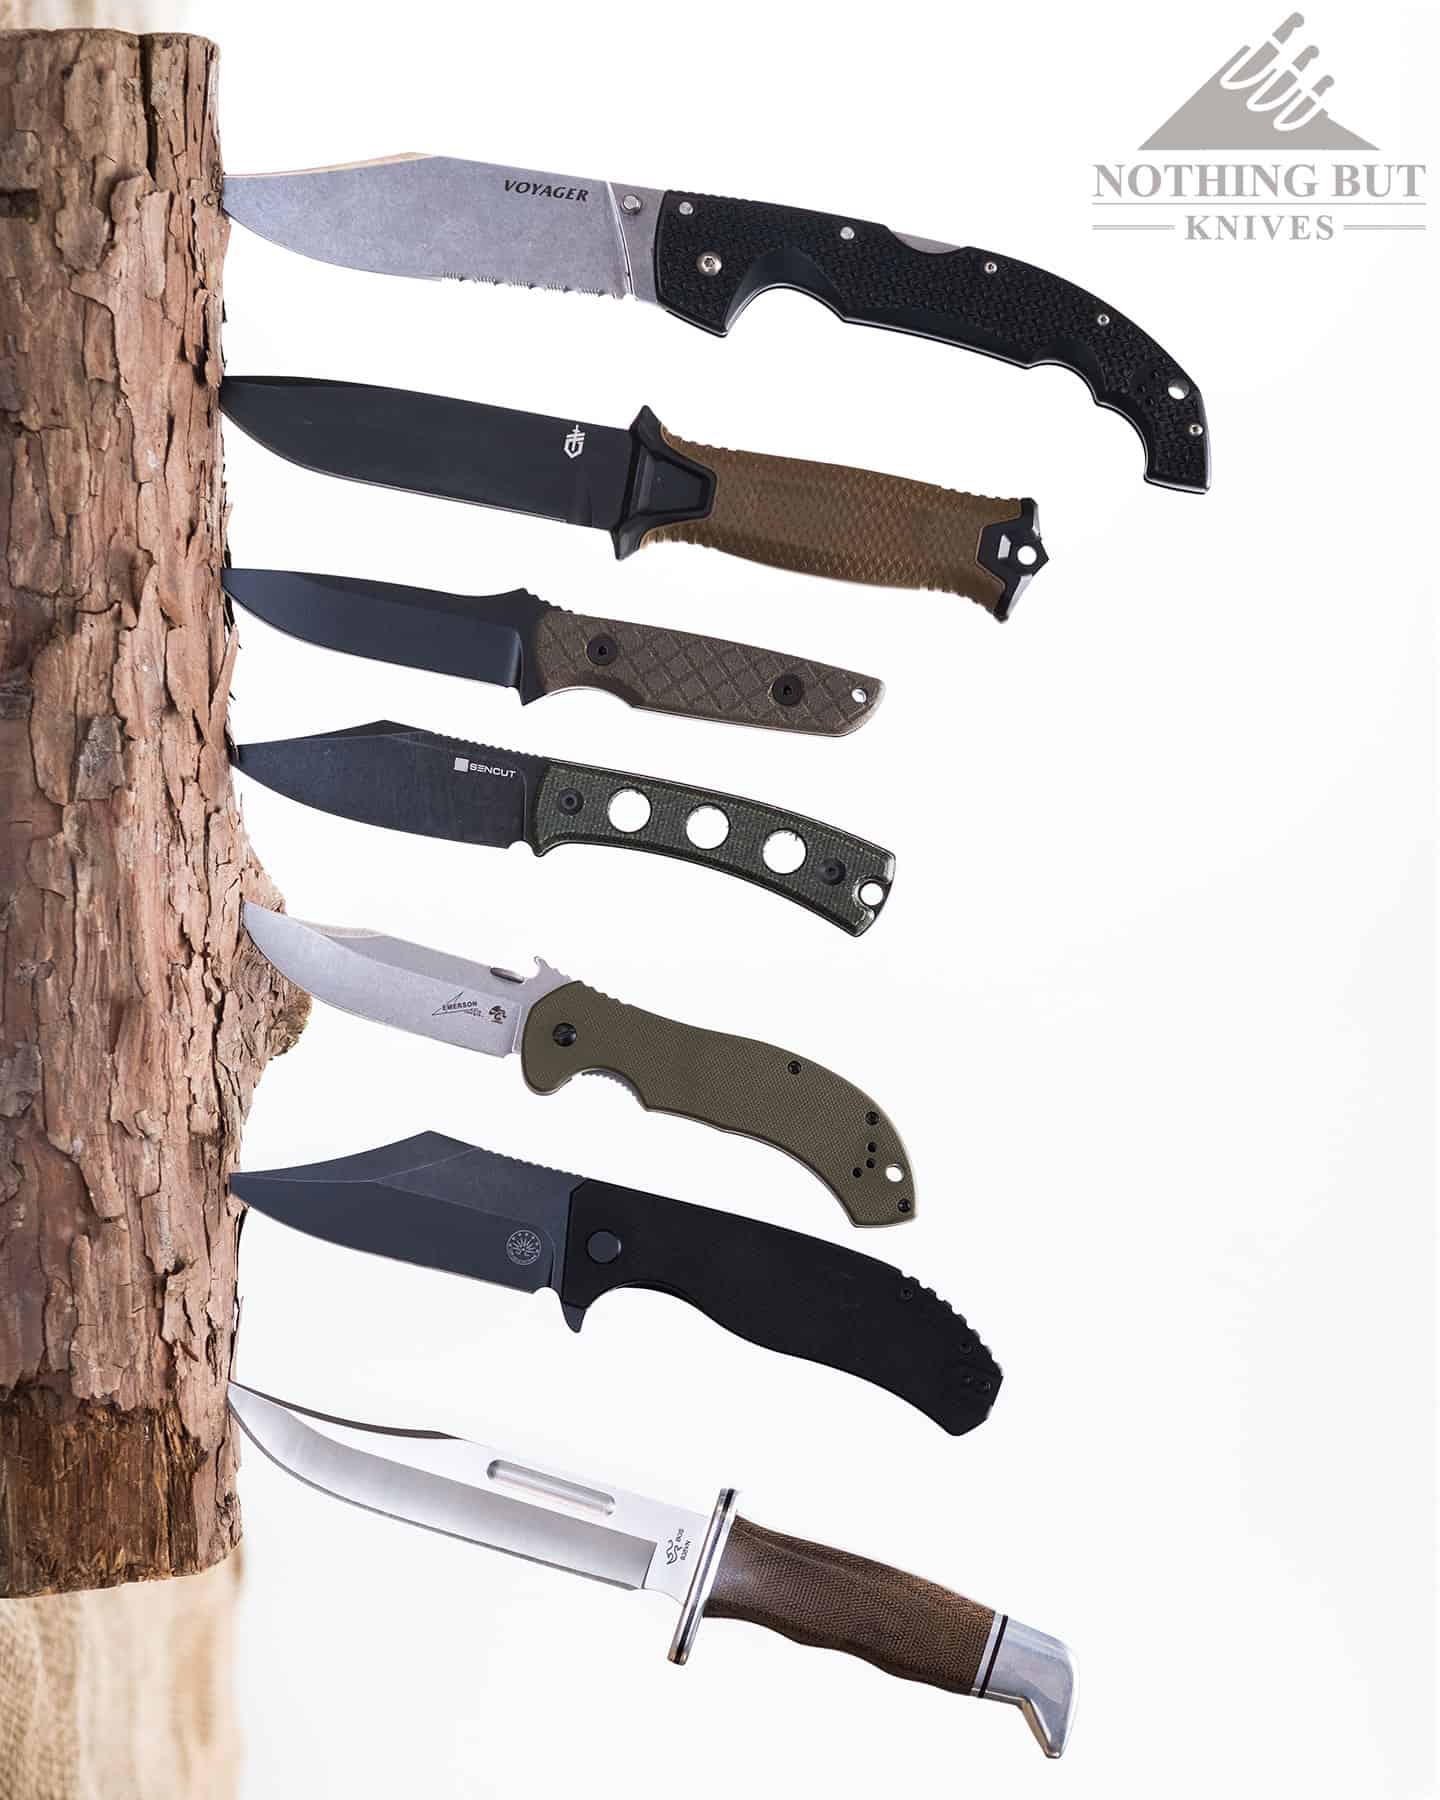 Best Tactical Knives From Our Favorite Brands